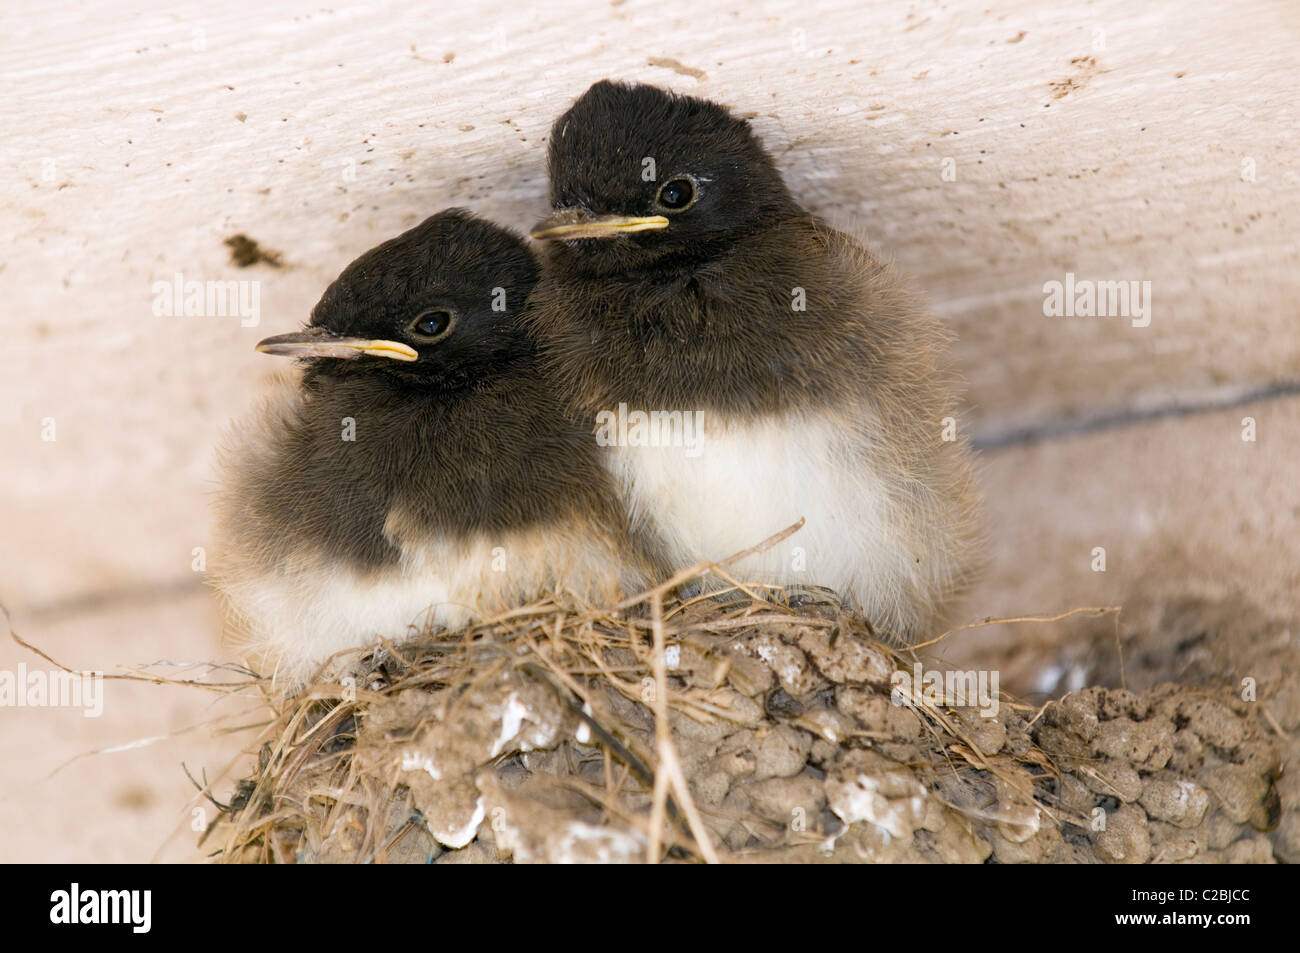 Two Black Phoebe, Sayornis nigricans, chicks about to fledge. Stock Photo